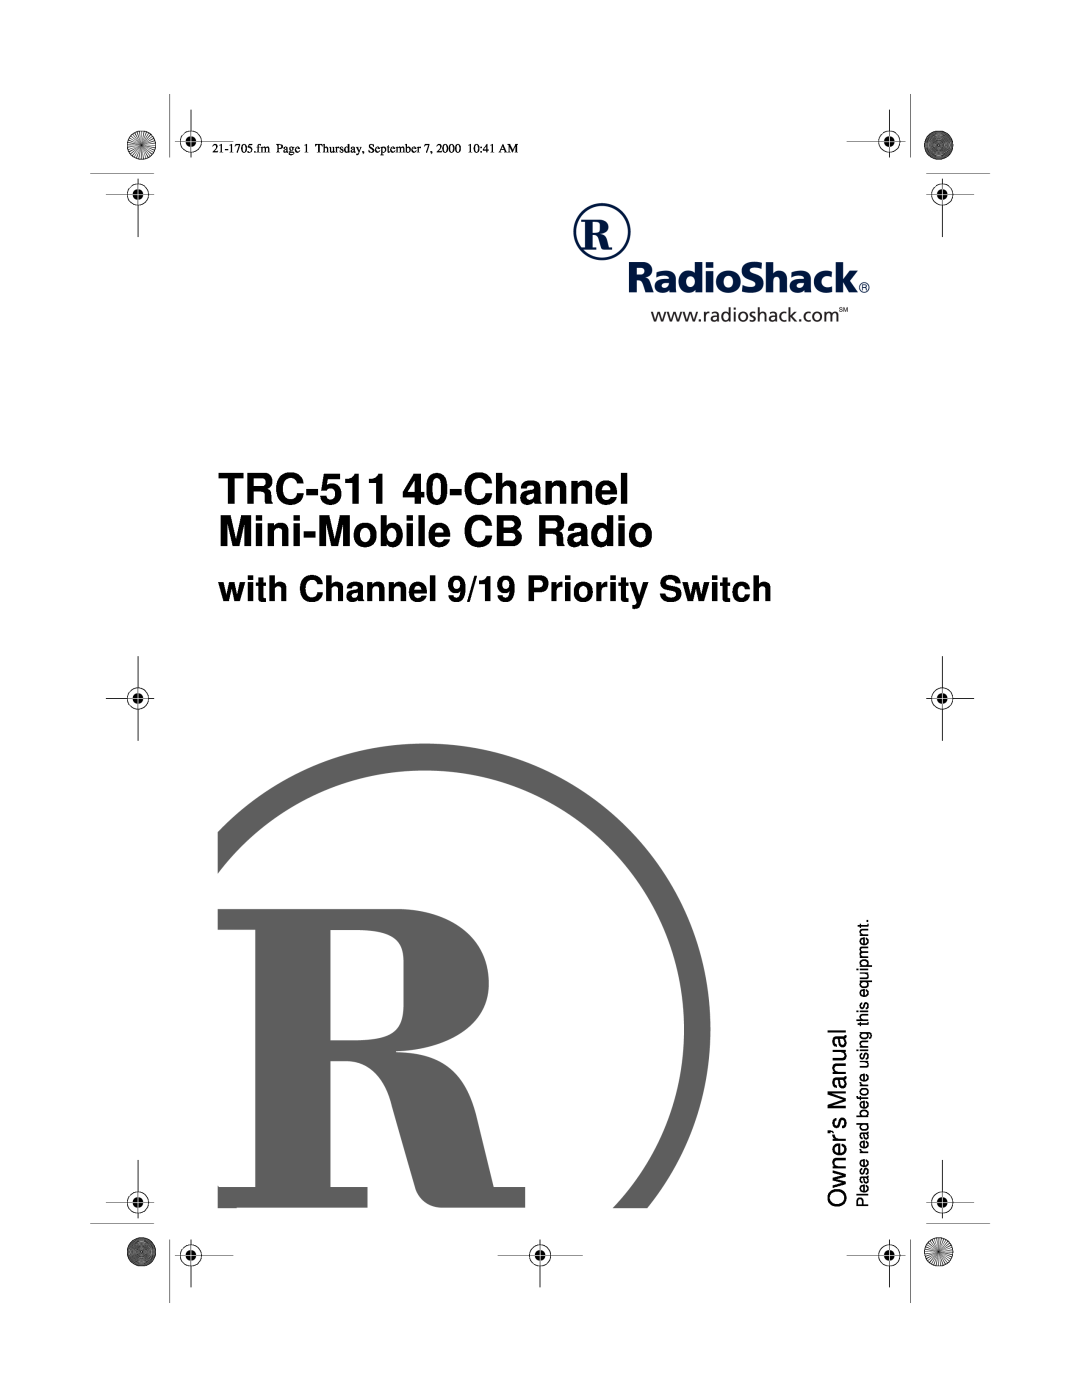 Radio Shack owner manual TRC-511 40-Channel Mini-MobileCB Radio, with Channel 9/19 Priority Switch 